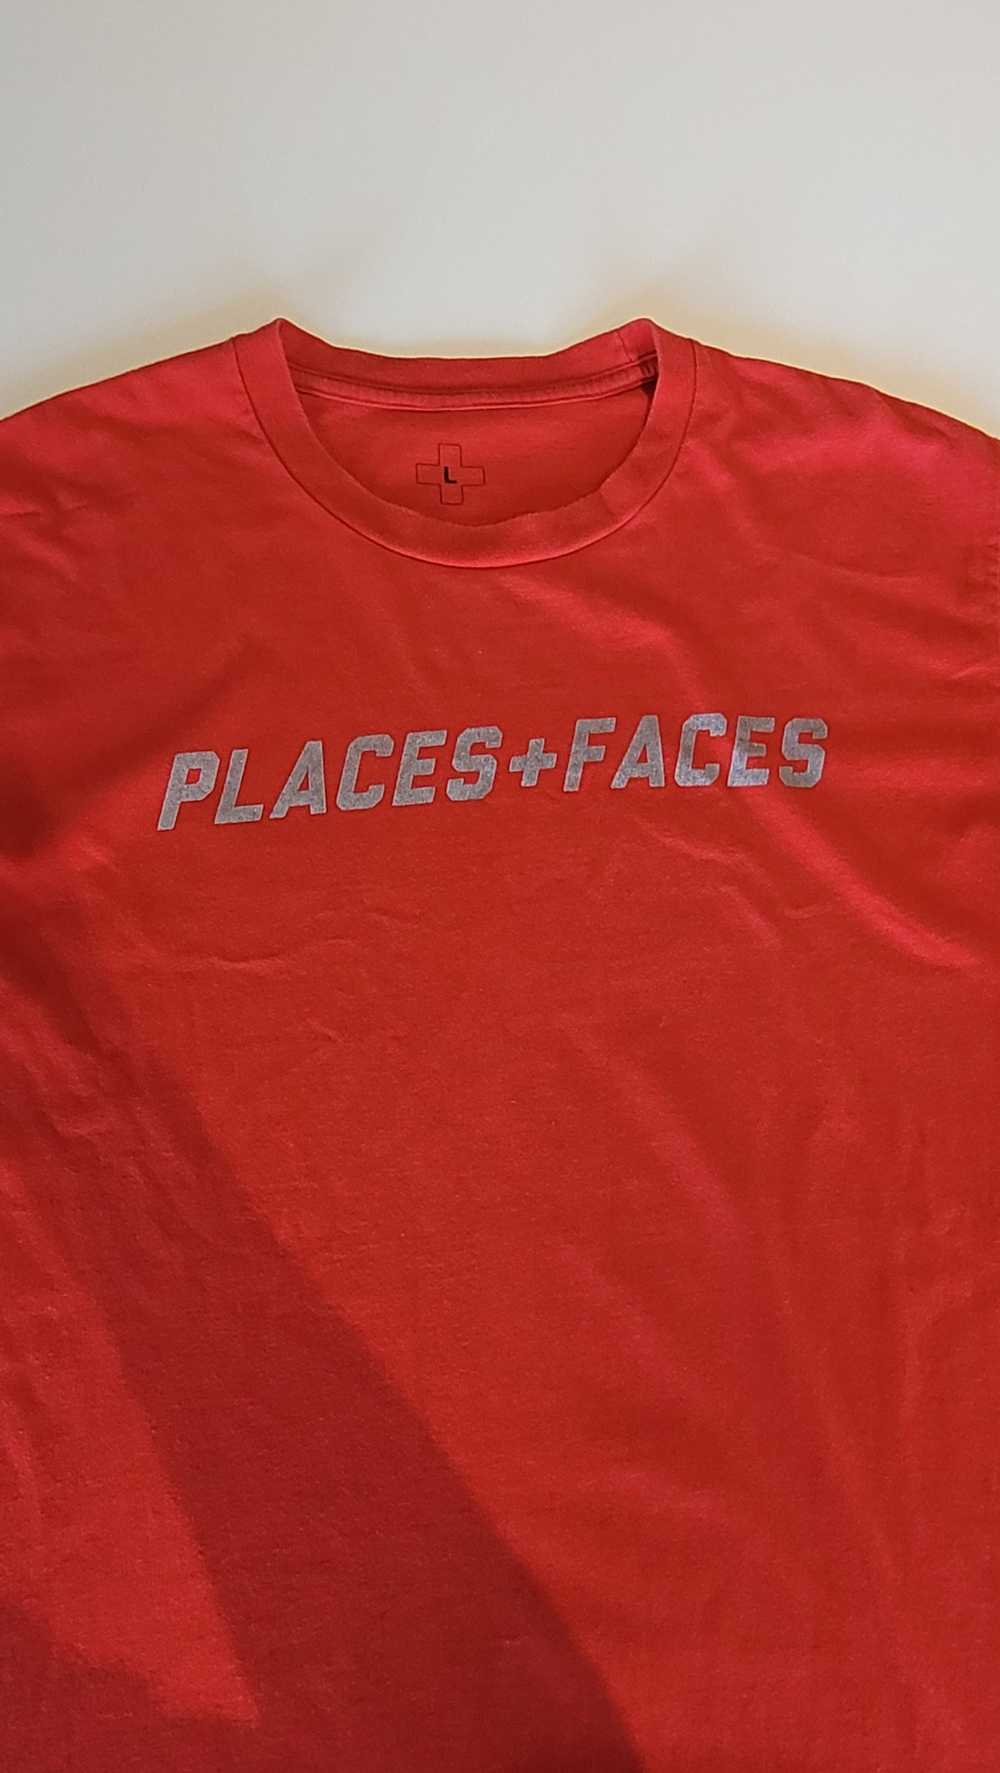 Places + Faces Reflective 3M logo tee - image 6